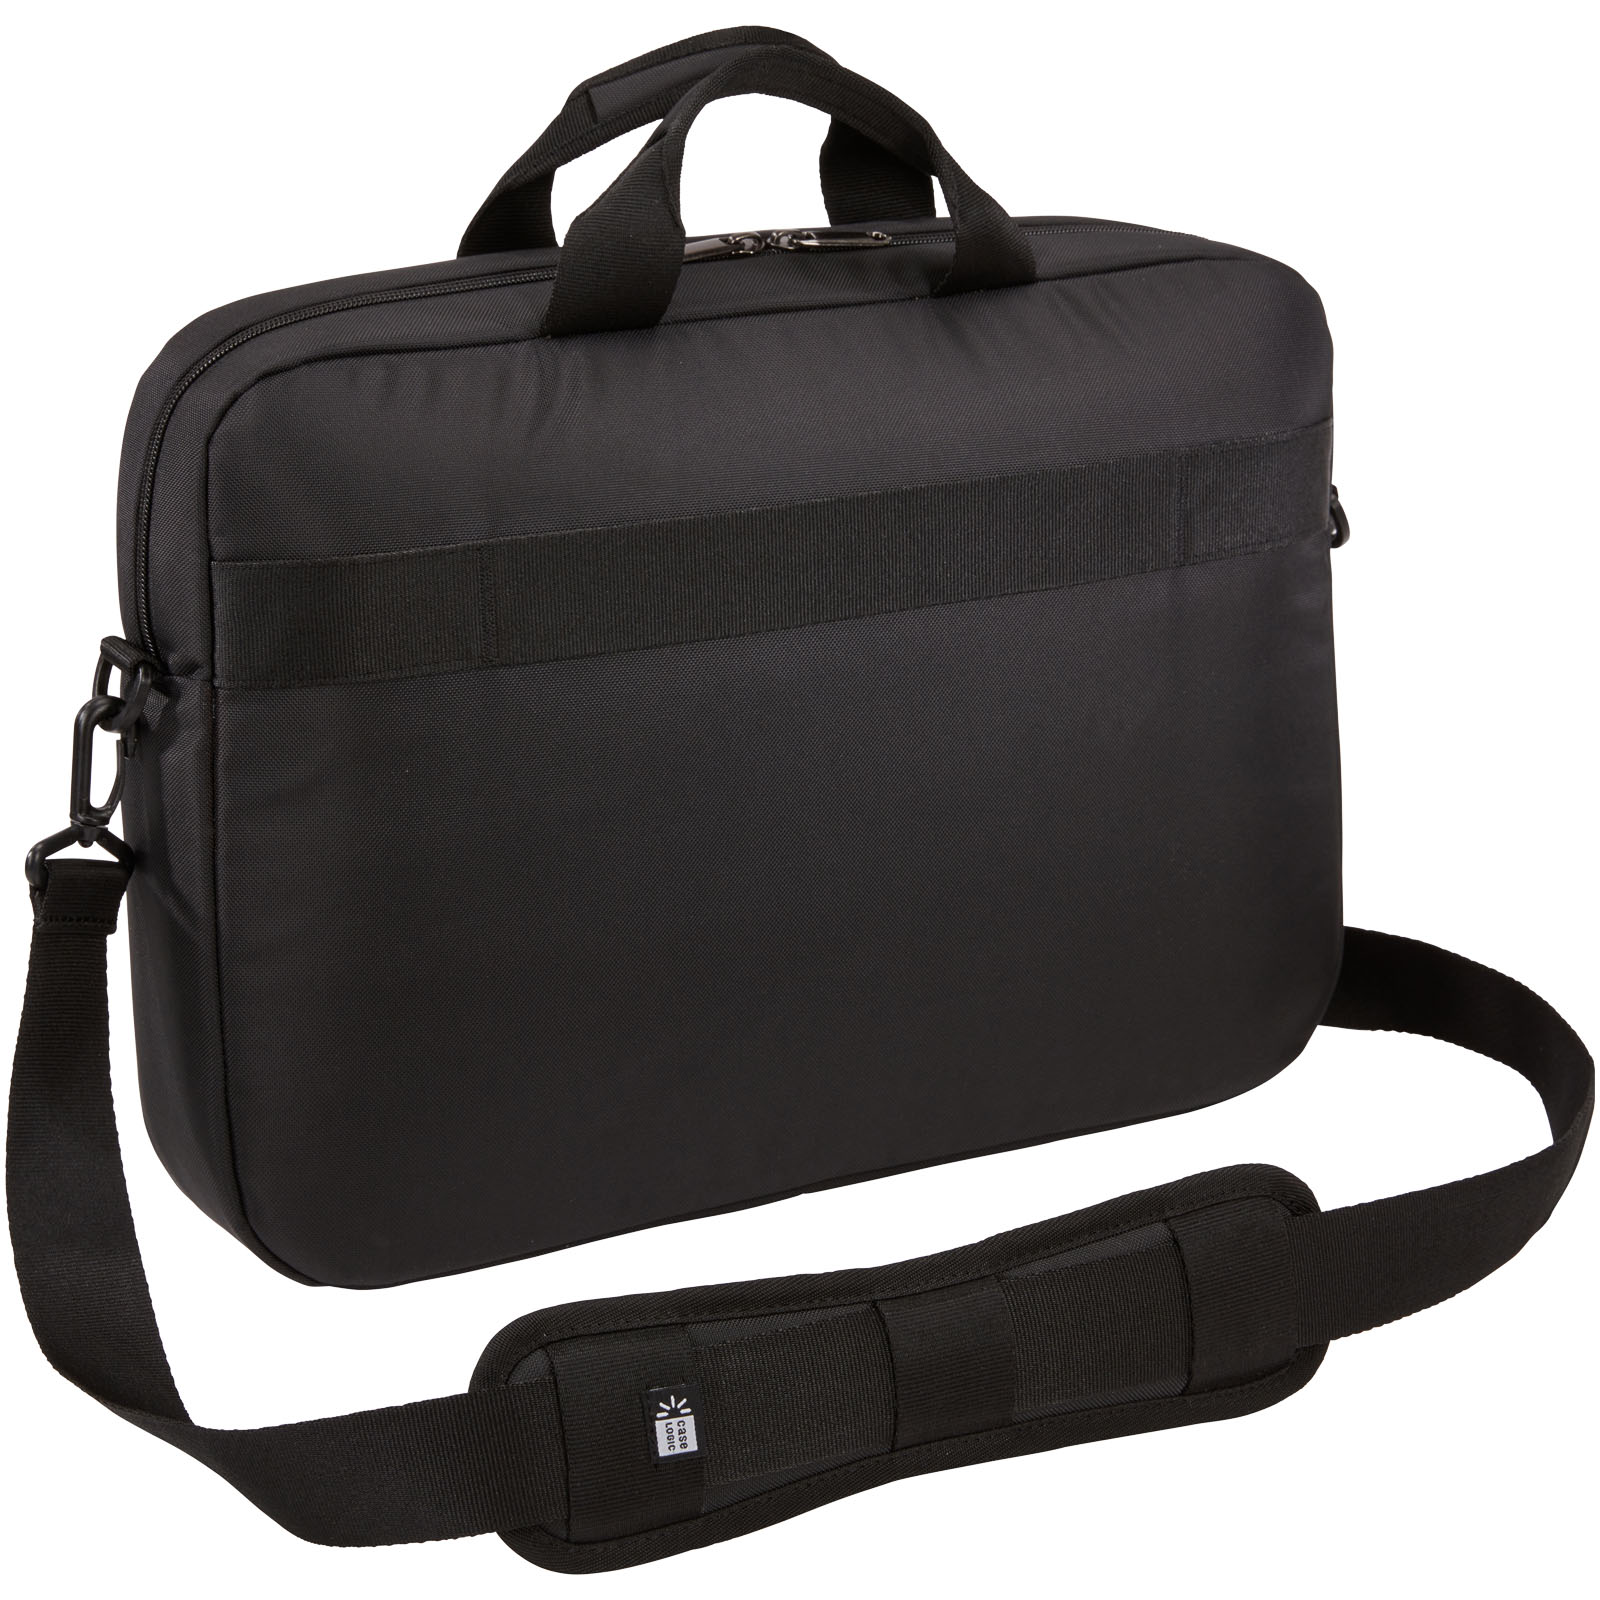 Advertising Conference bags - Case Logic Propel 15.6